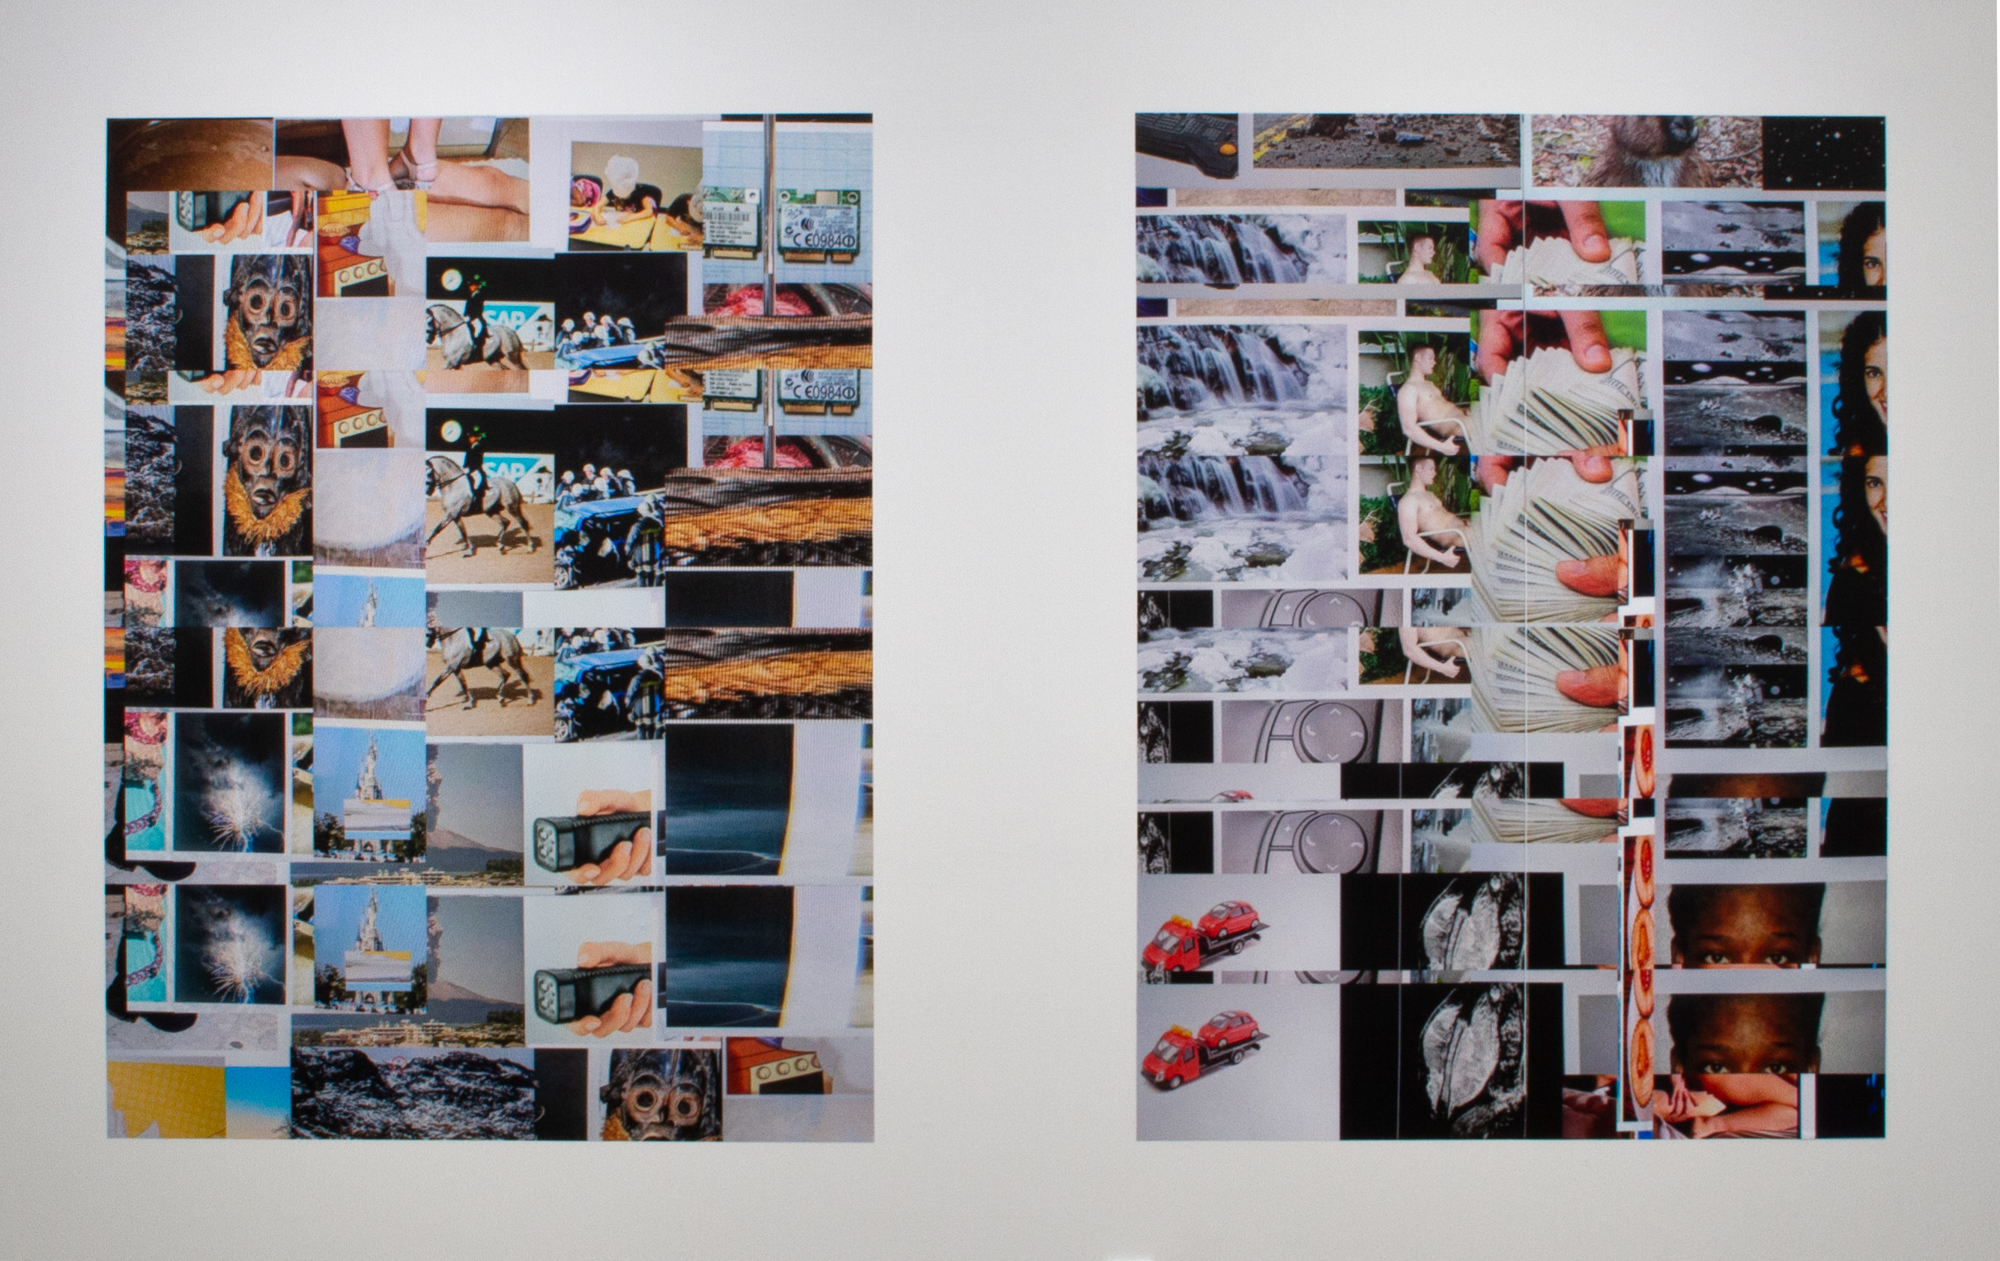  Anthony Discenza, Left:  Image Search Composition 2831-1542165551477 , 2018, Digital output on 3M Control-Tac vinyl, 67.7 x 50 in., ed. of 3 + AP + temporary exhibition copy. Right:  Image Search Composition 3140-1539913076358 , 2018, Digital output